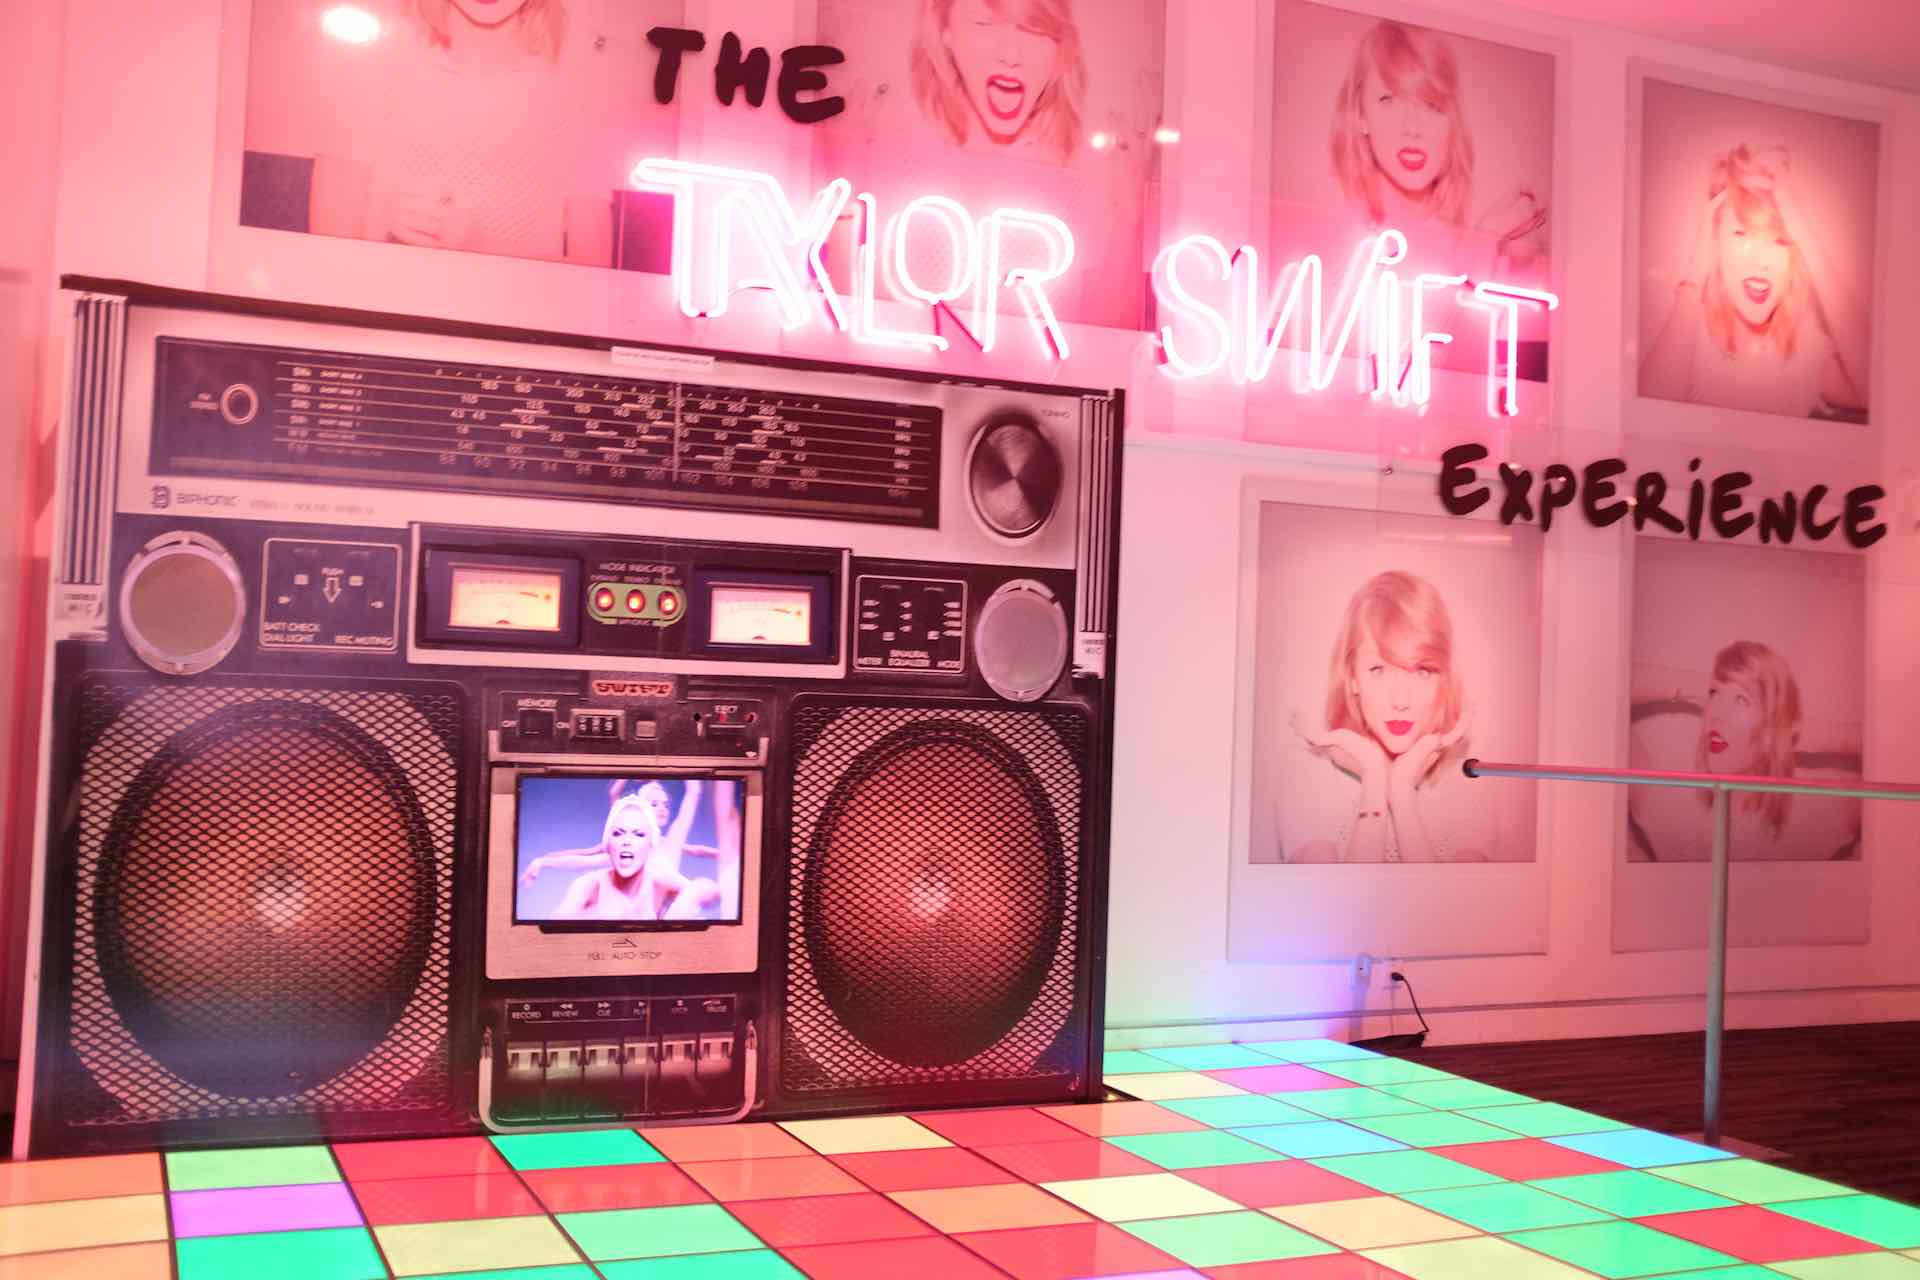 Boombox for The Taylor Swift Experience